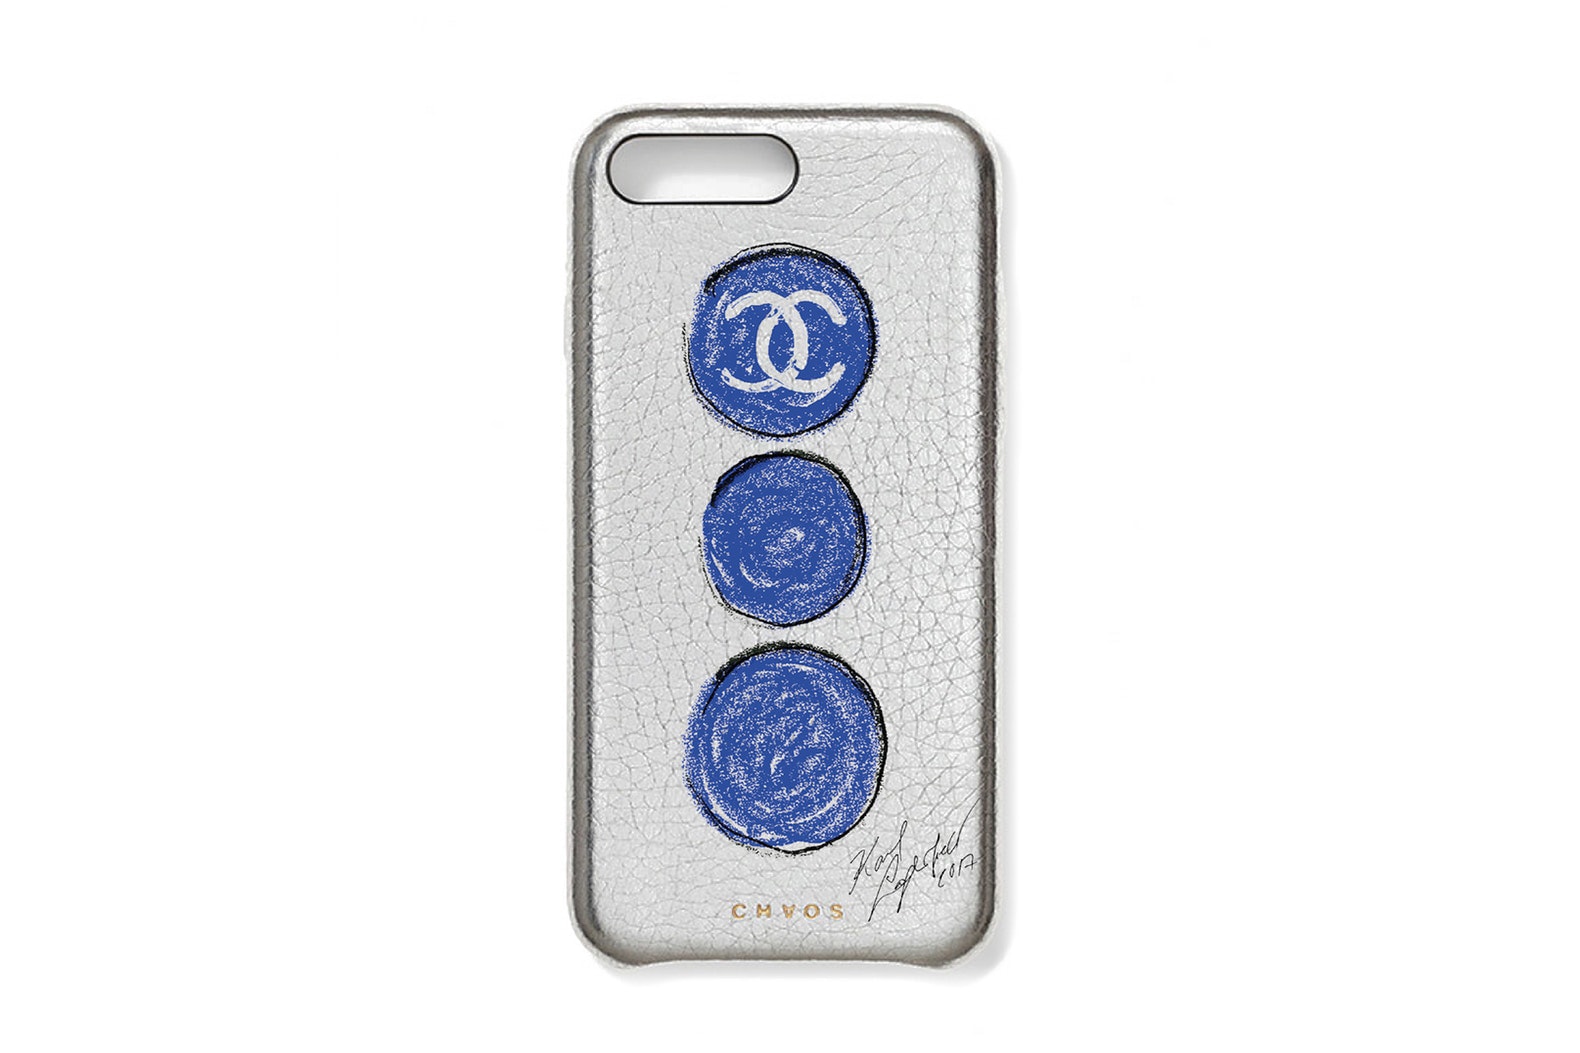 Karl Lagerfeld Chanel colette party VIP iPhone phone cases Adidas Pharrell Williams hu NMD